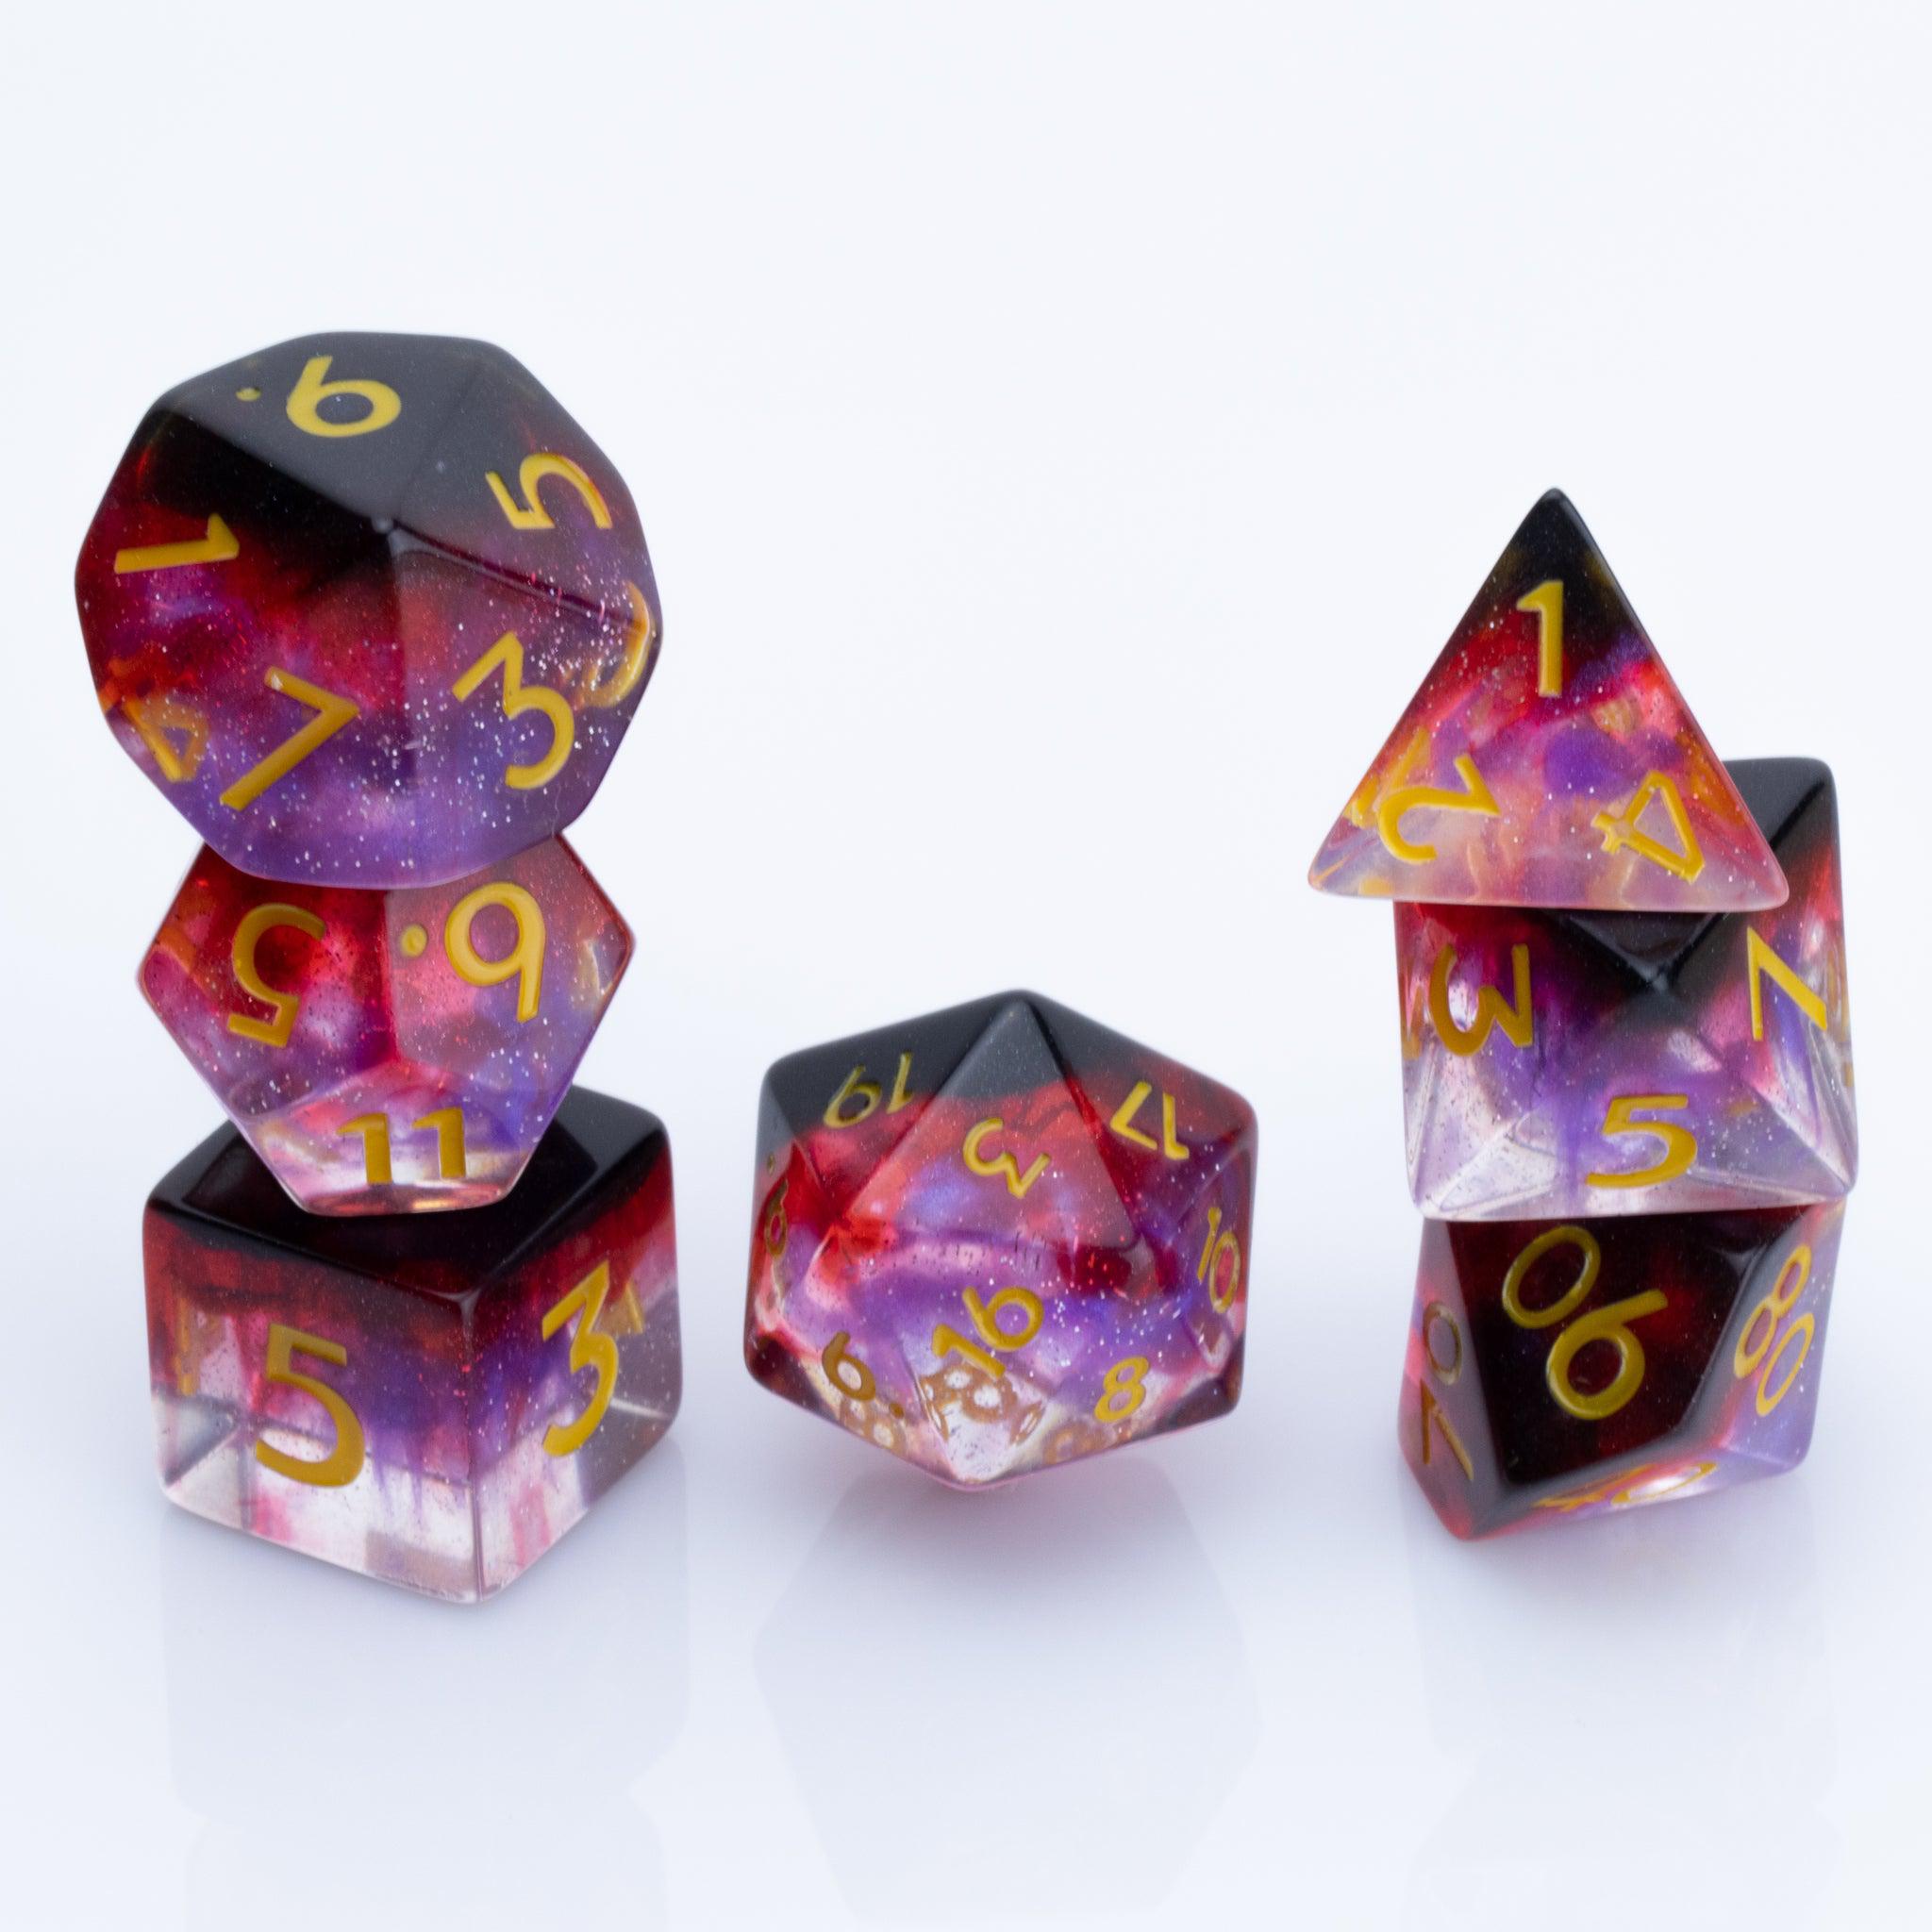 Blood Moon, dripping red, purple and clear 7 piece DND dice set stacked on a white background.